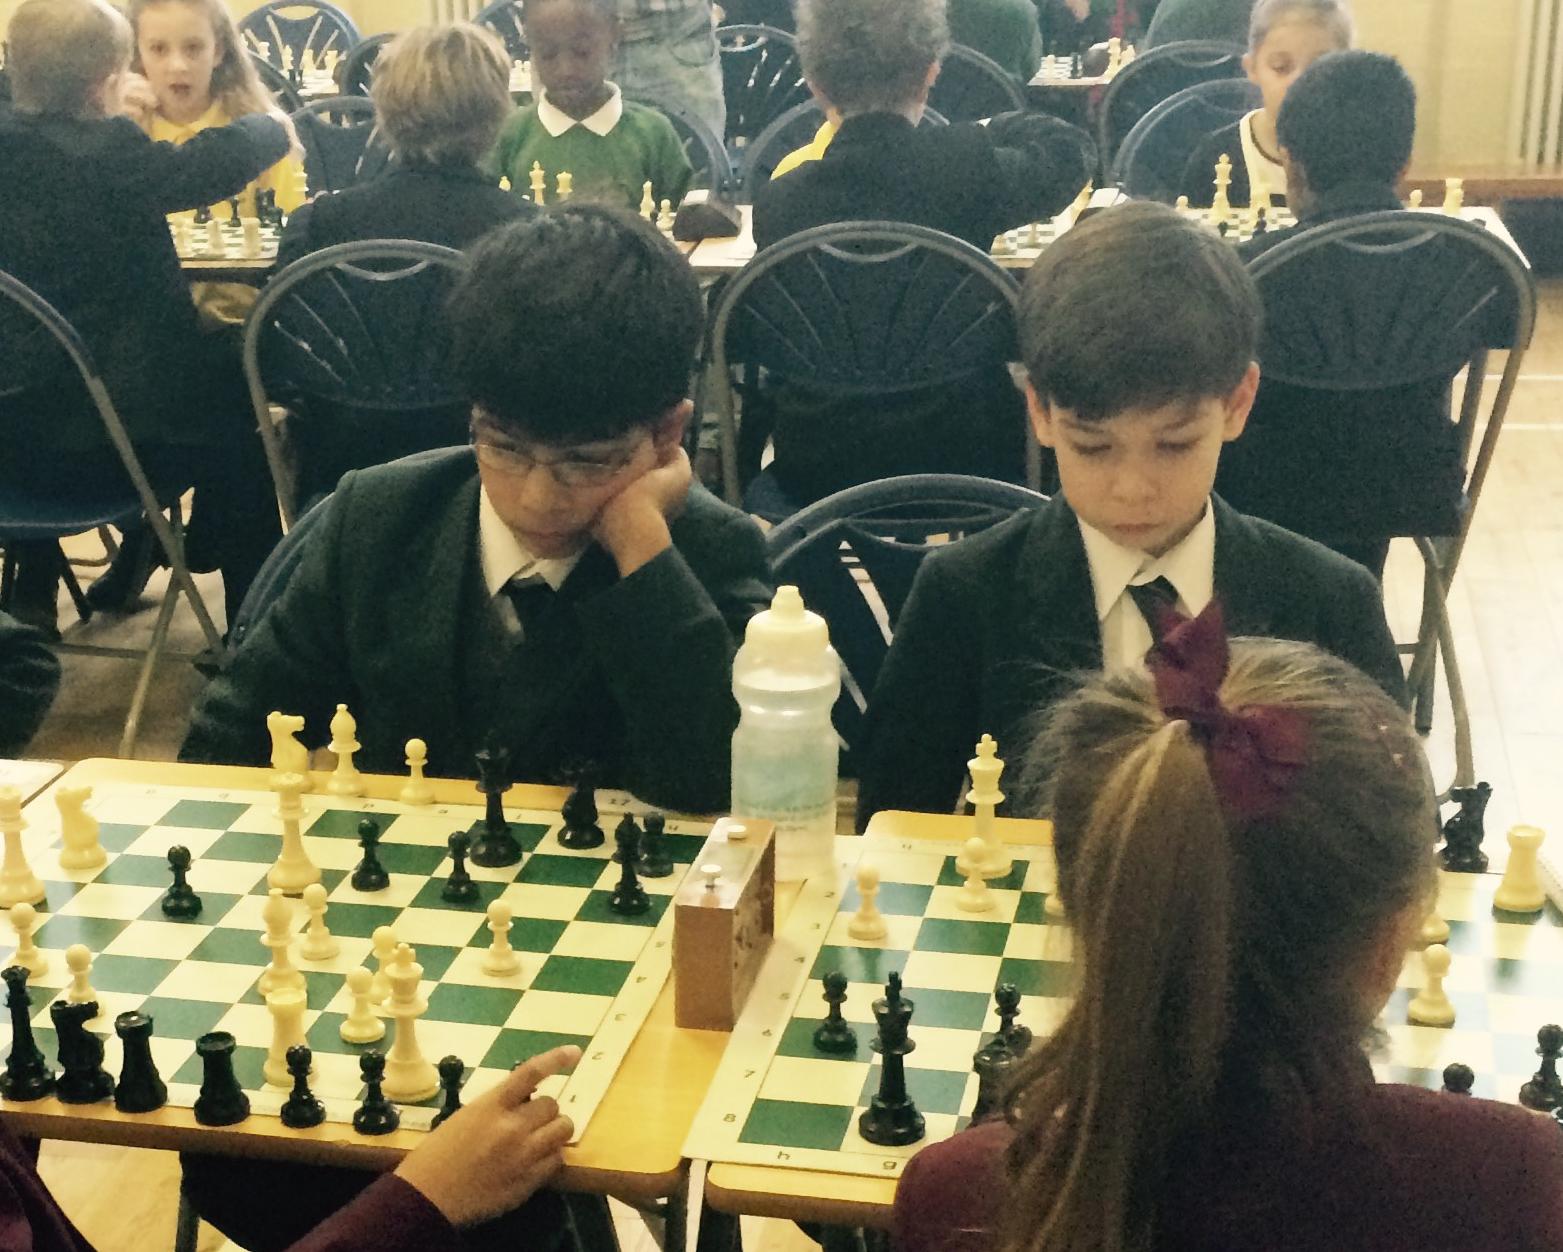 chess players from cheadle hulme school compete in the U9 English Schools Chess Association competition at bolton boys' school